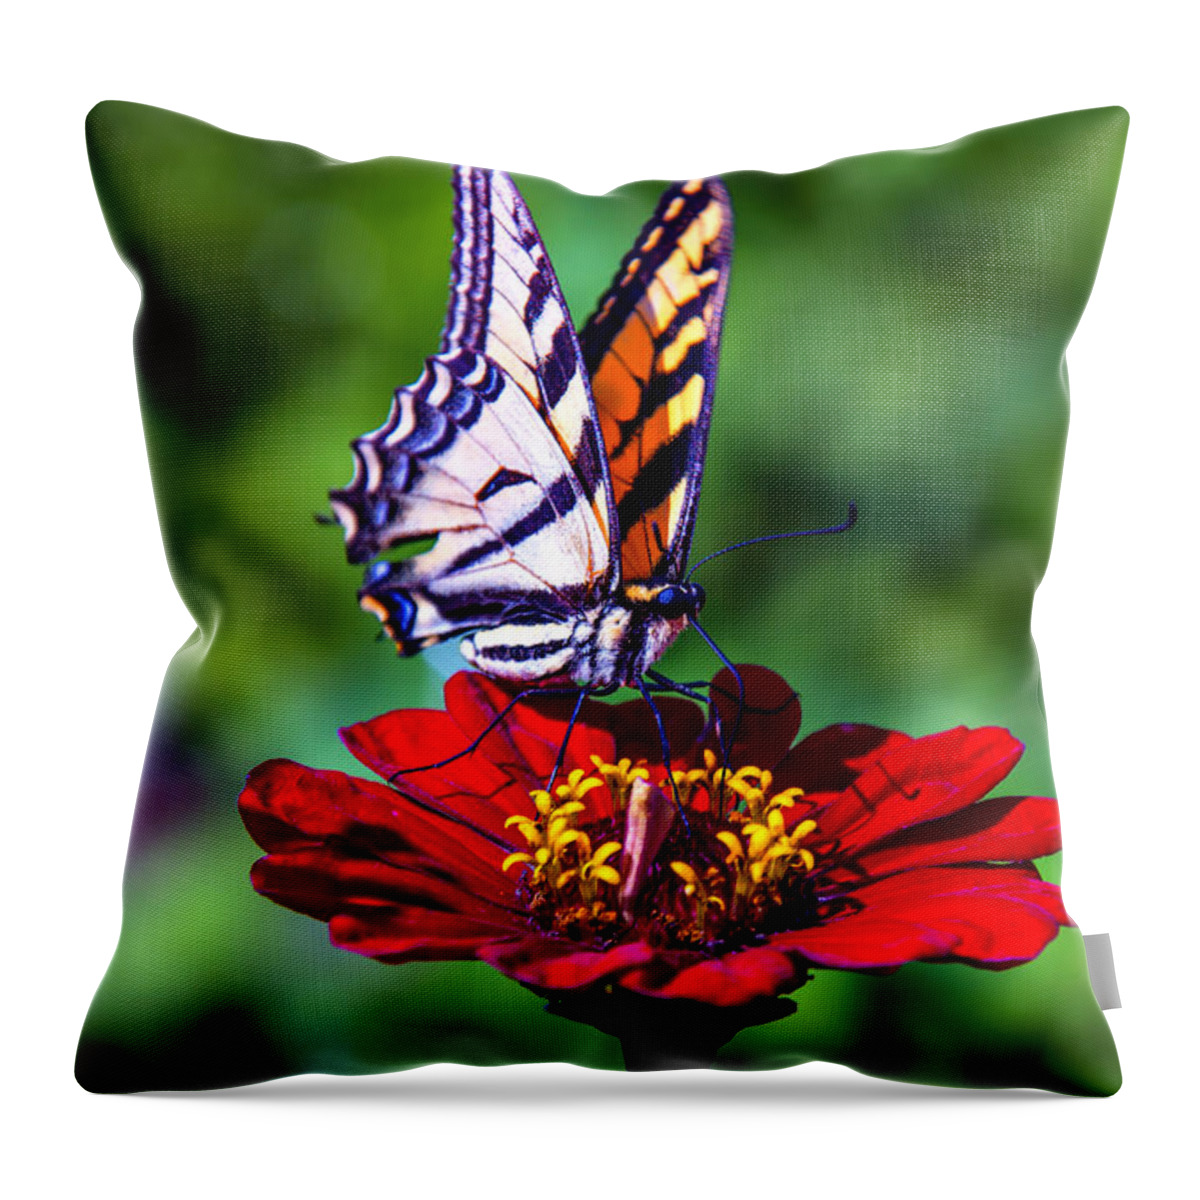 Red Throw Pillow featuring the photograph Tiger Tail On Red Flower by Garry Gay